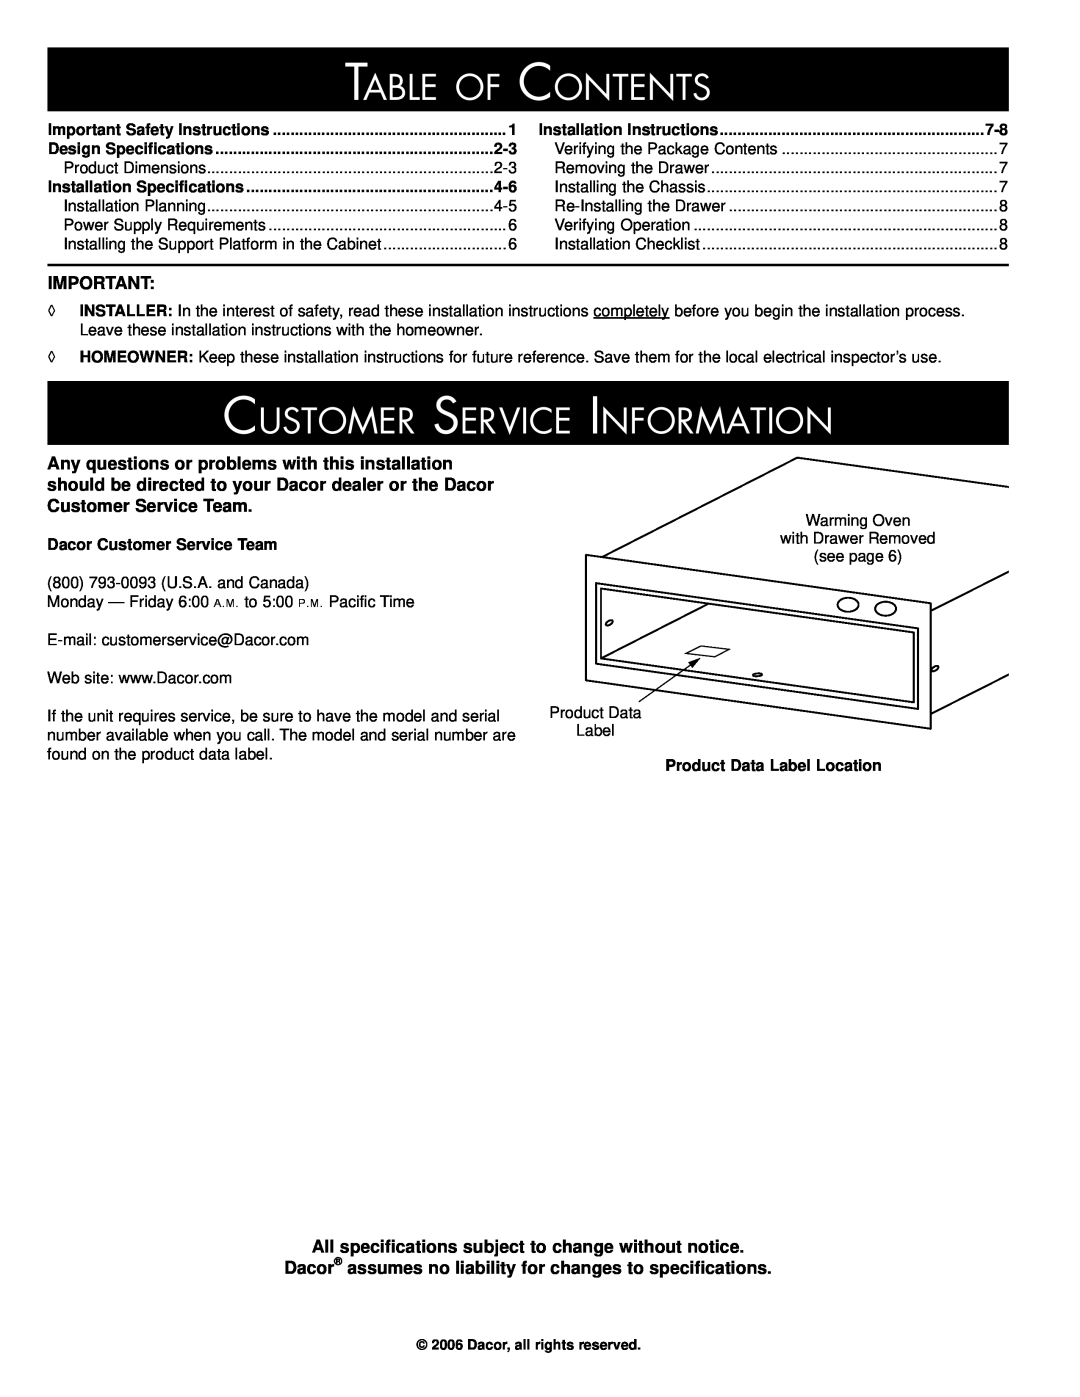 Dacor PWO, IOWO, IWO Table of Contents, Customer Service Information, All specifications subject to change without notice 